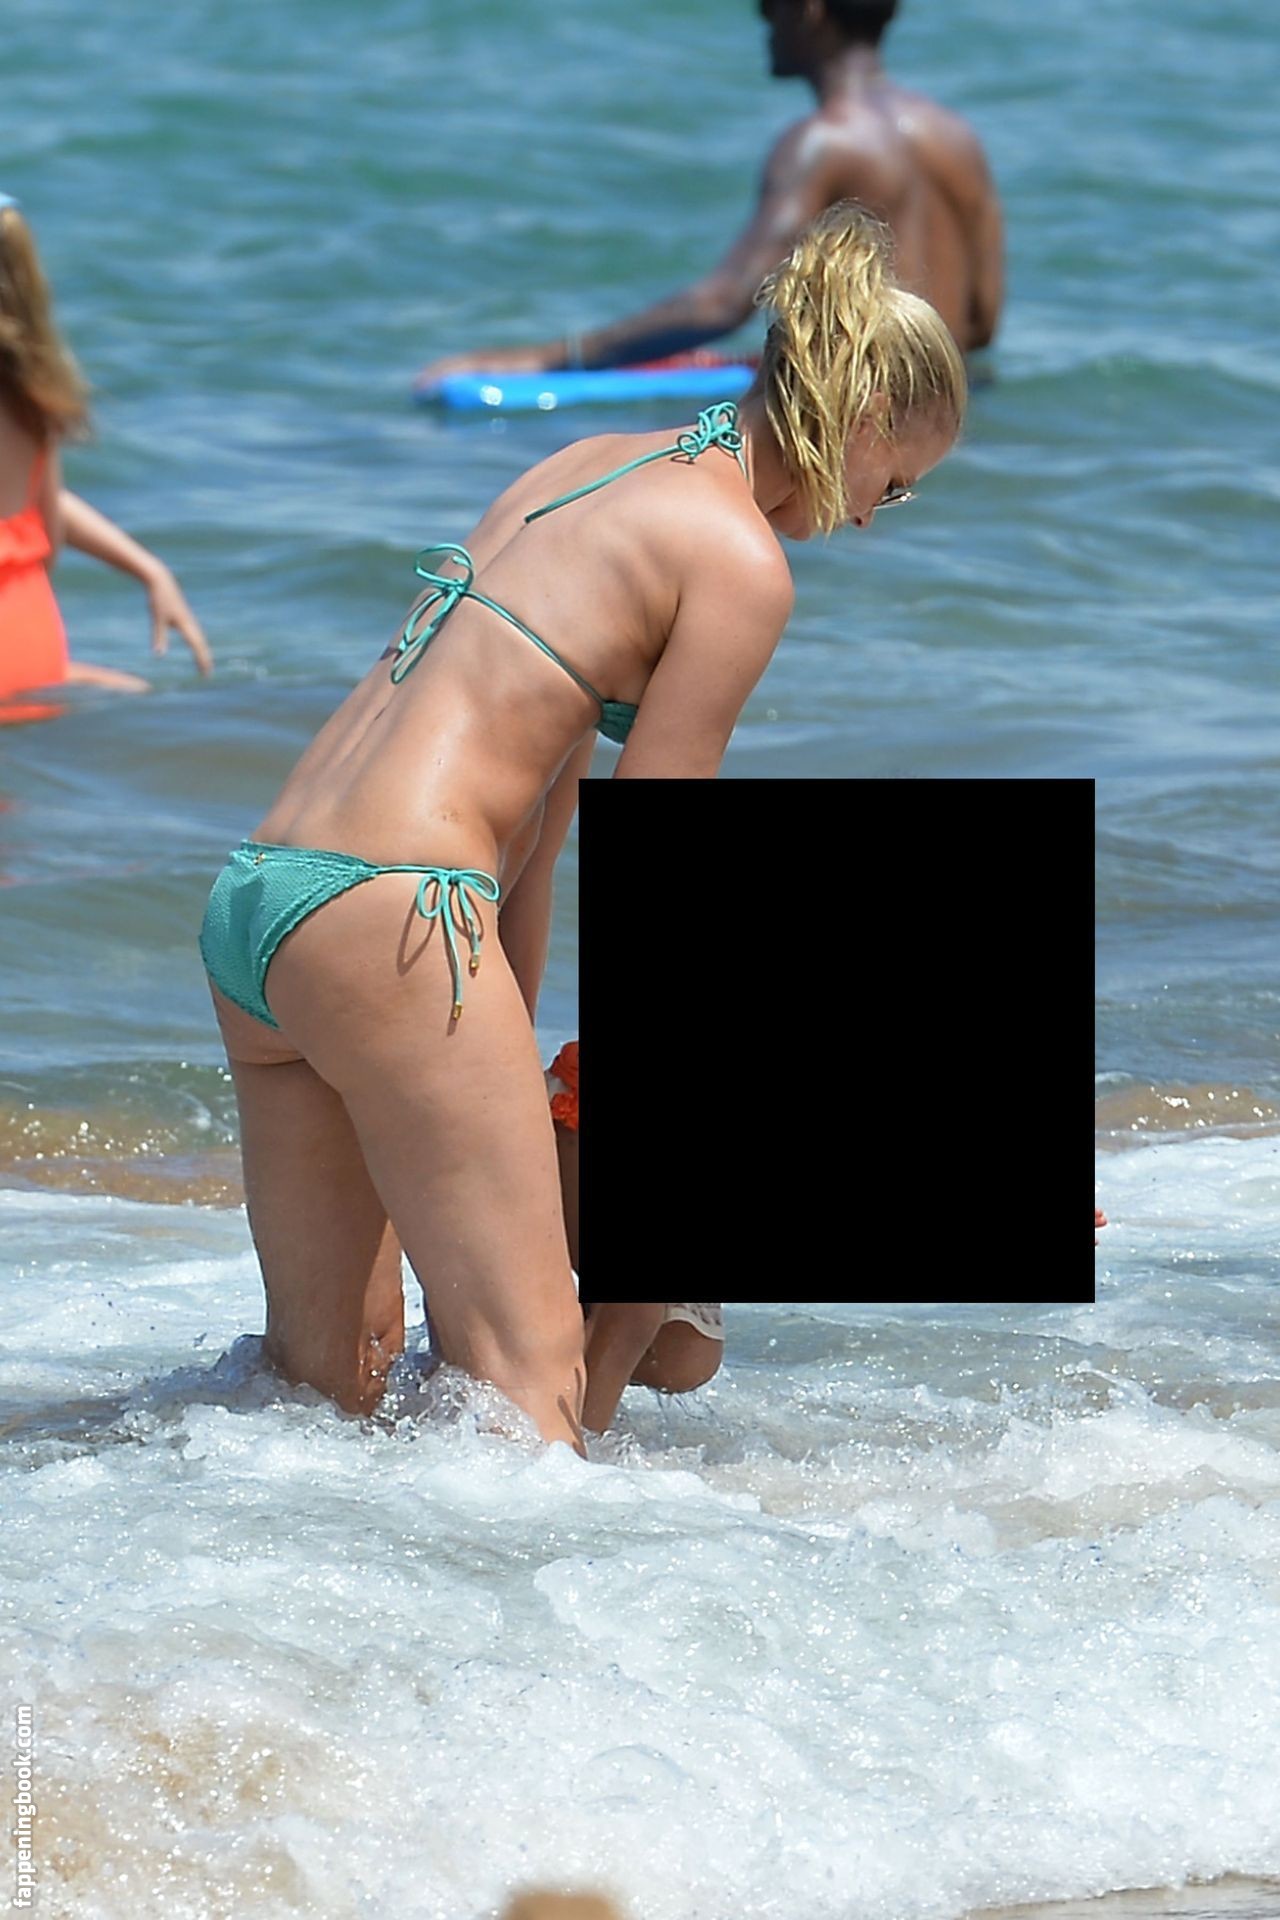 Paige butcher topless